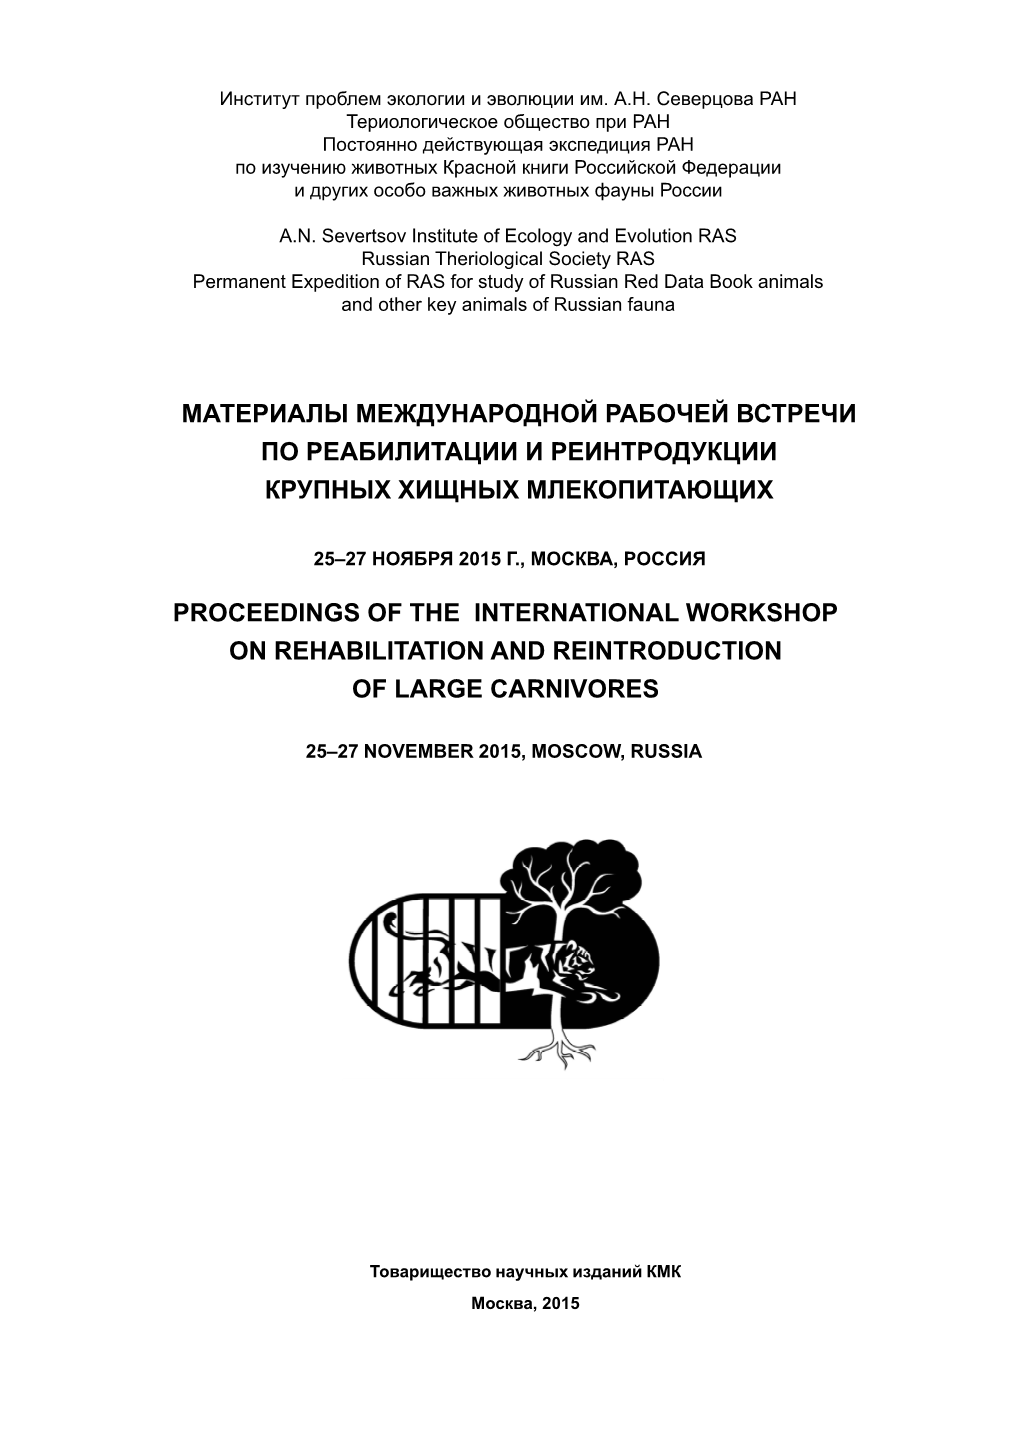 Proceedings of the International Workshop on Rehabilitation and Reintroduction of Large Carnivores